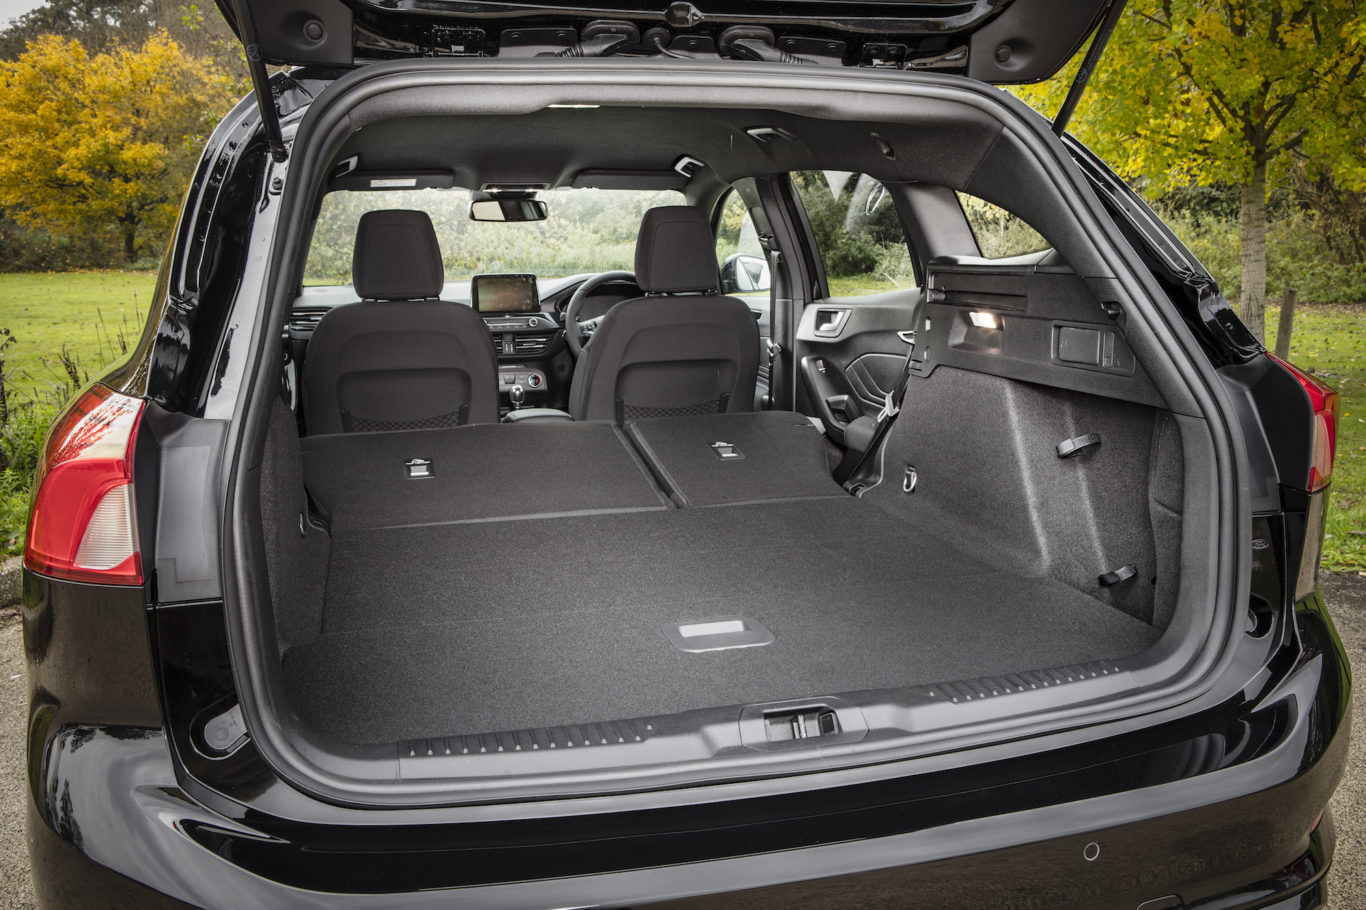 The Focus Estate benefits from a large boot